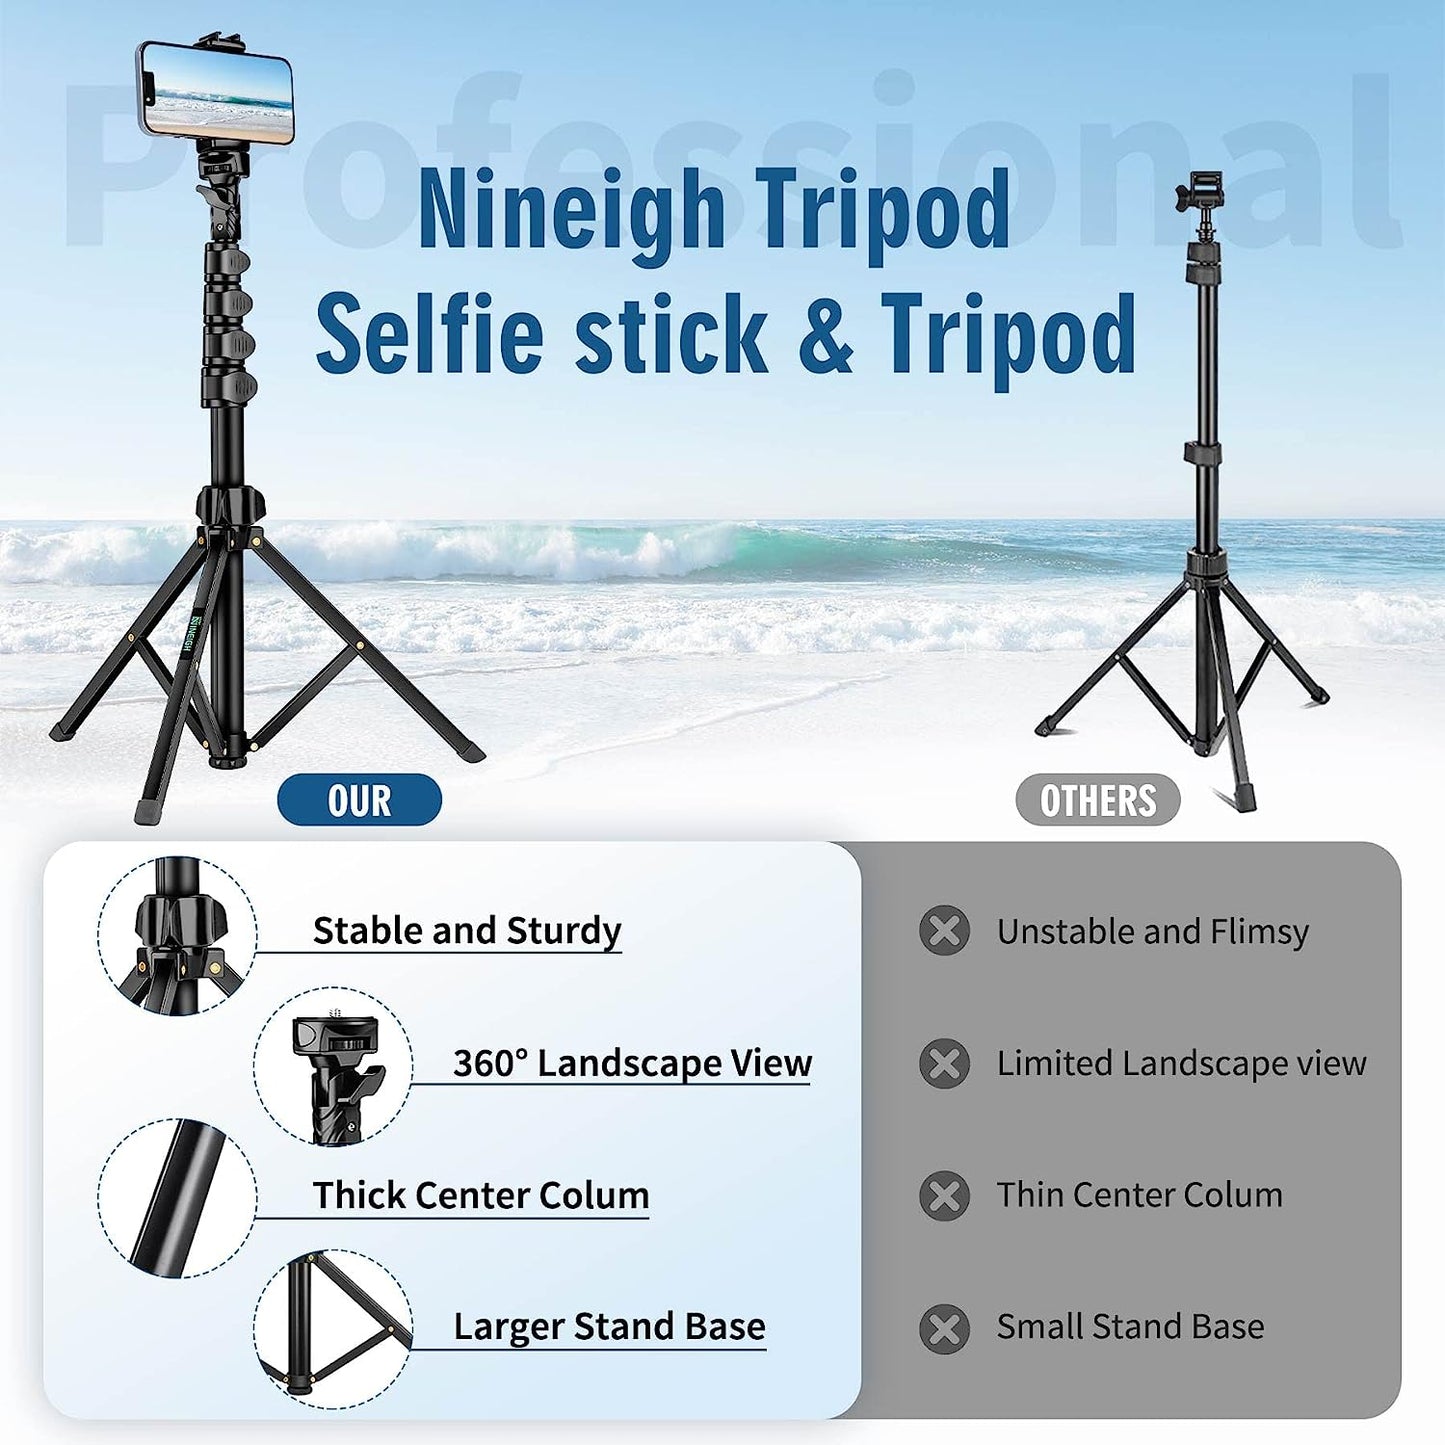 Selfie Stick Tripod, 85" Phone Tripod, Aluminum Tripod Stand for Video Recording Photo Vlog, Travel Cell Phone Tripod with Gooseneck/Remote/Phone Holder, Compatible with iPhone Android Smartphone(USA)